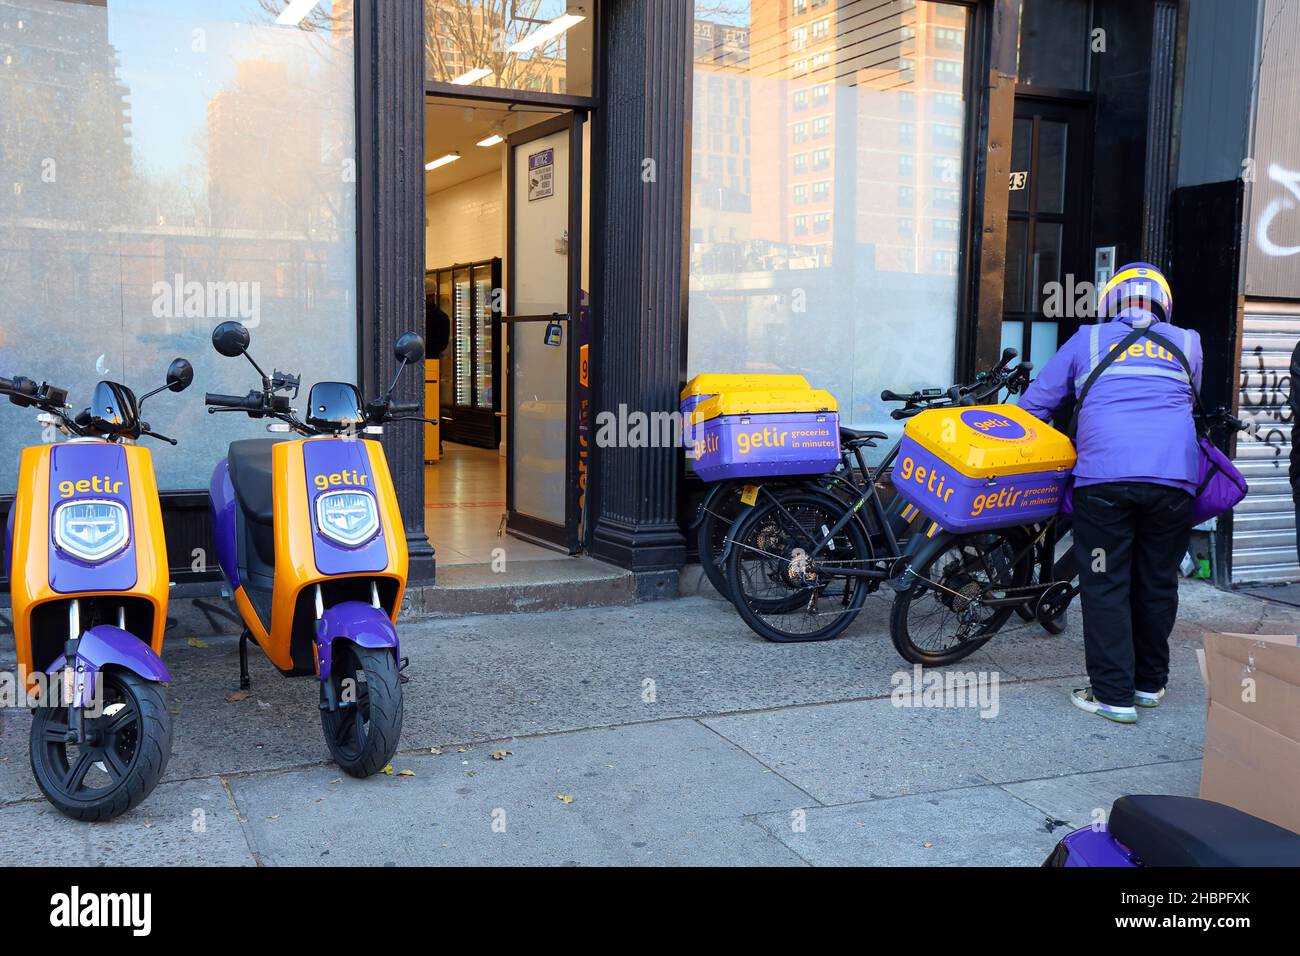 Istanbul-based Getir on-demand grocery delivery service at their micro-fulfillment center on Essex St in Manhattan, New York. quick commerce. Stock Photo